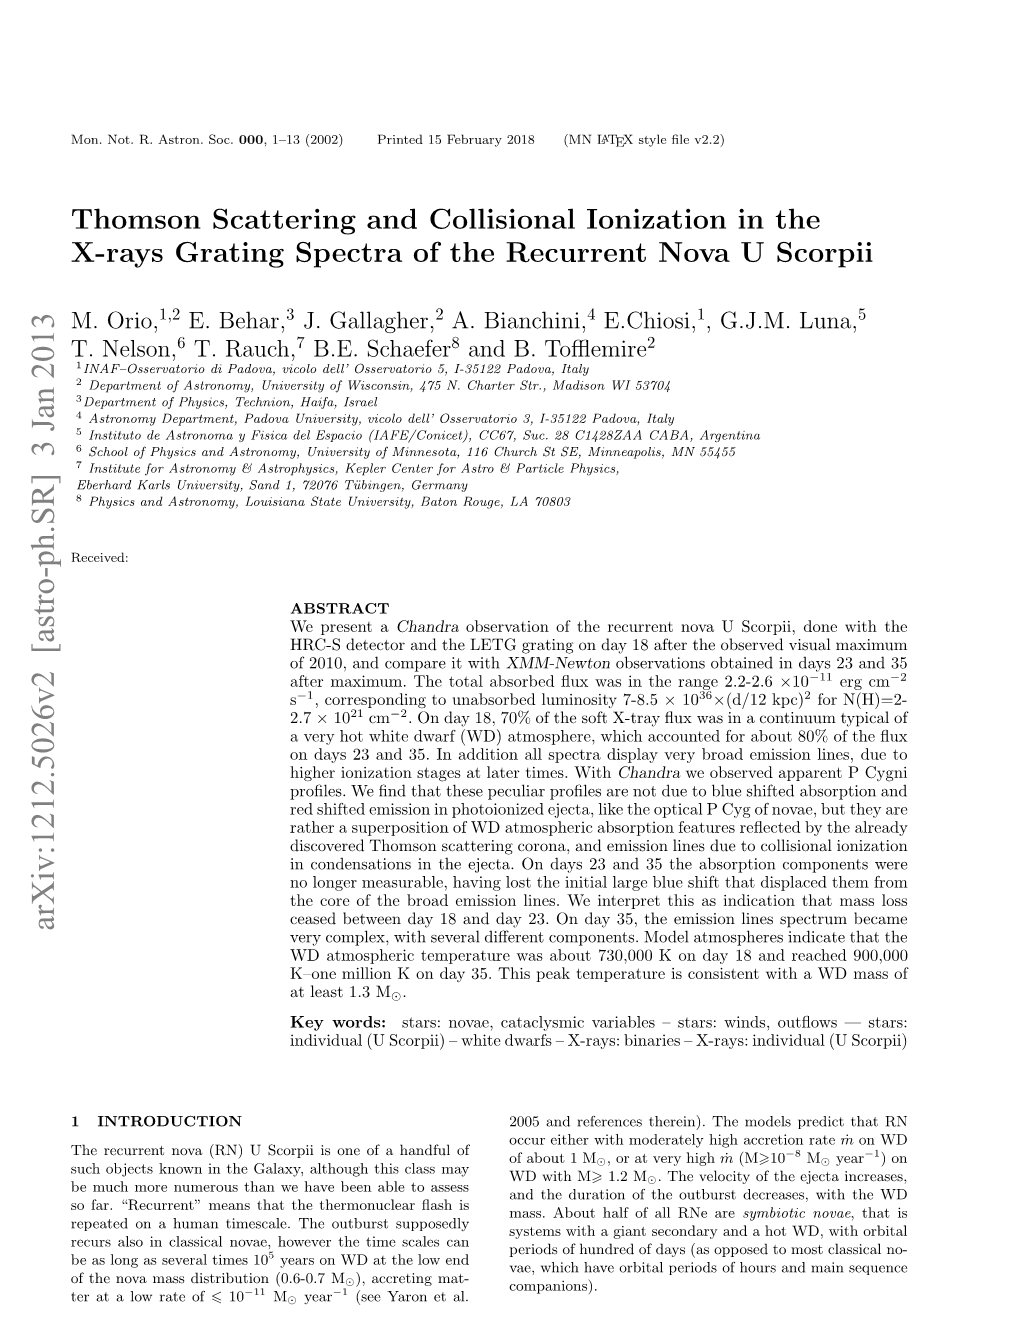 Thomson Scattering and Collisional Ionization in the X-Rays Grating